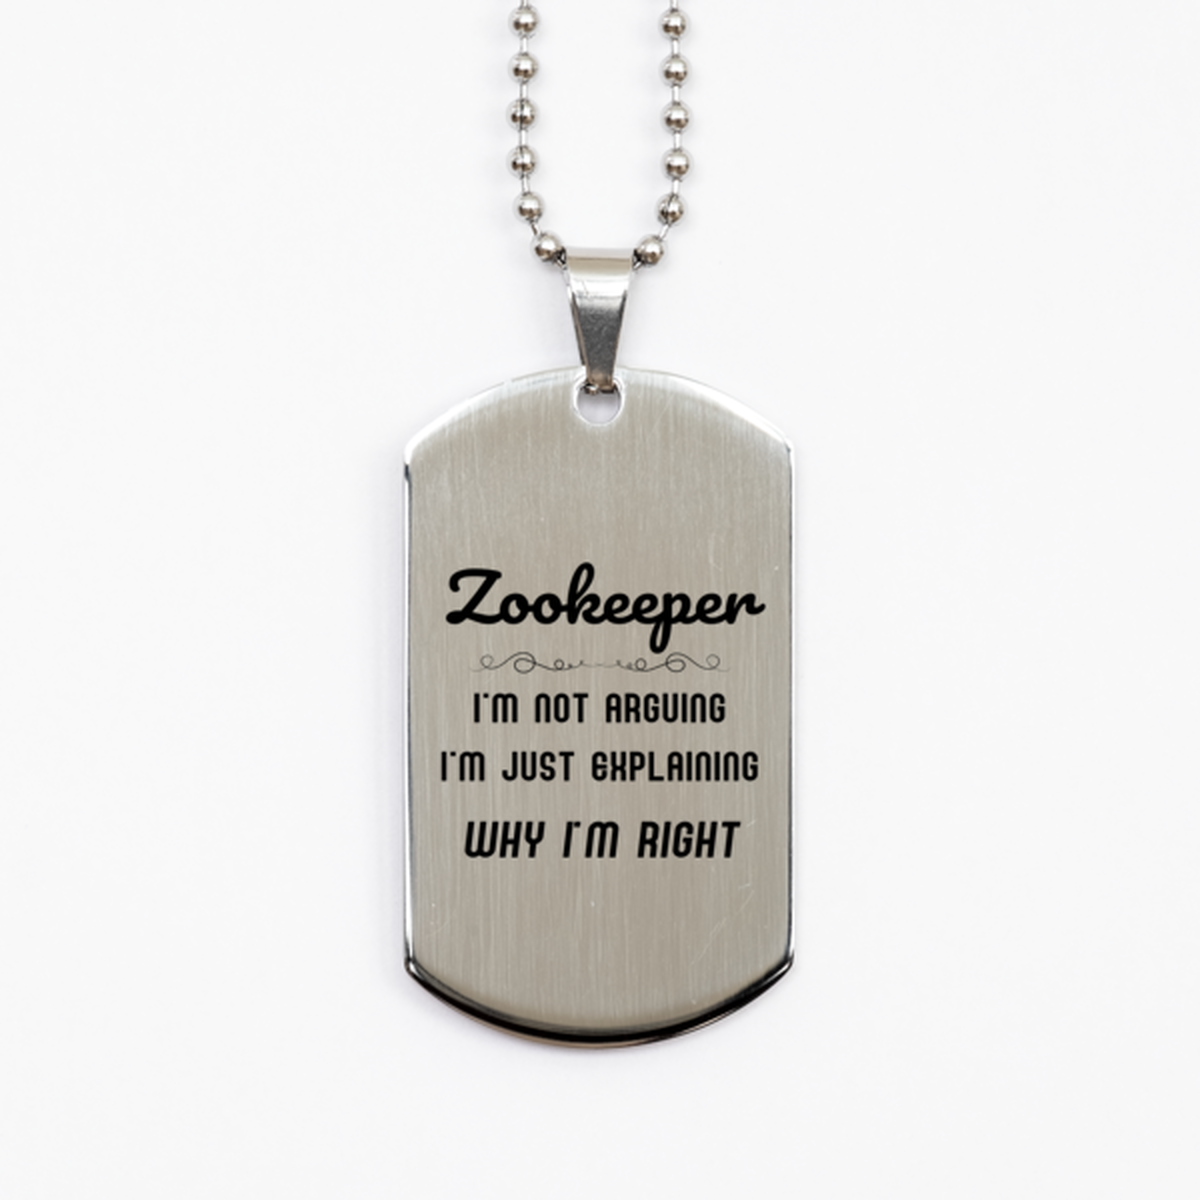 Zookeeper I'm not Arguing. I'm Just Explaining Why I'm RIGHT Silver Dog Tag, Funny Saying Quote Zookeeper Gifts For Zookeeper Graduation Birthday Christmas Gifts for Men Women Coworker